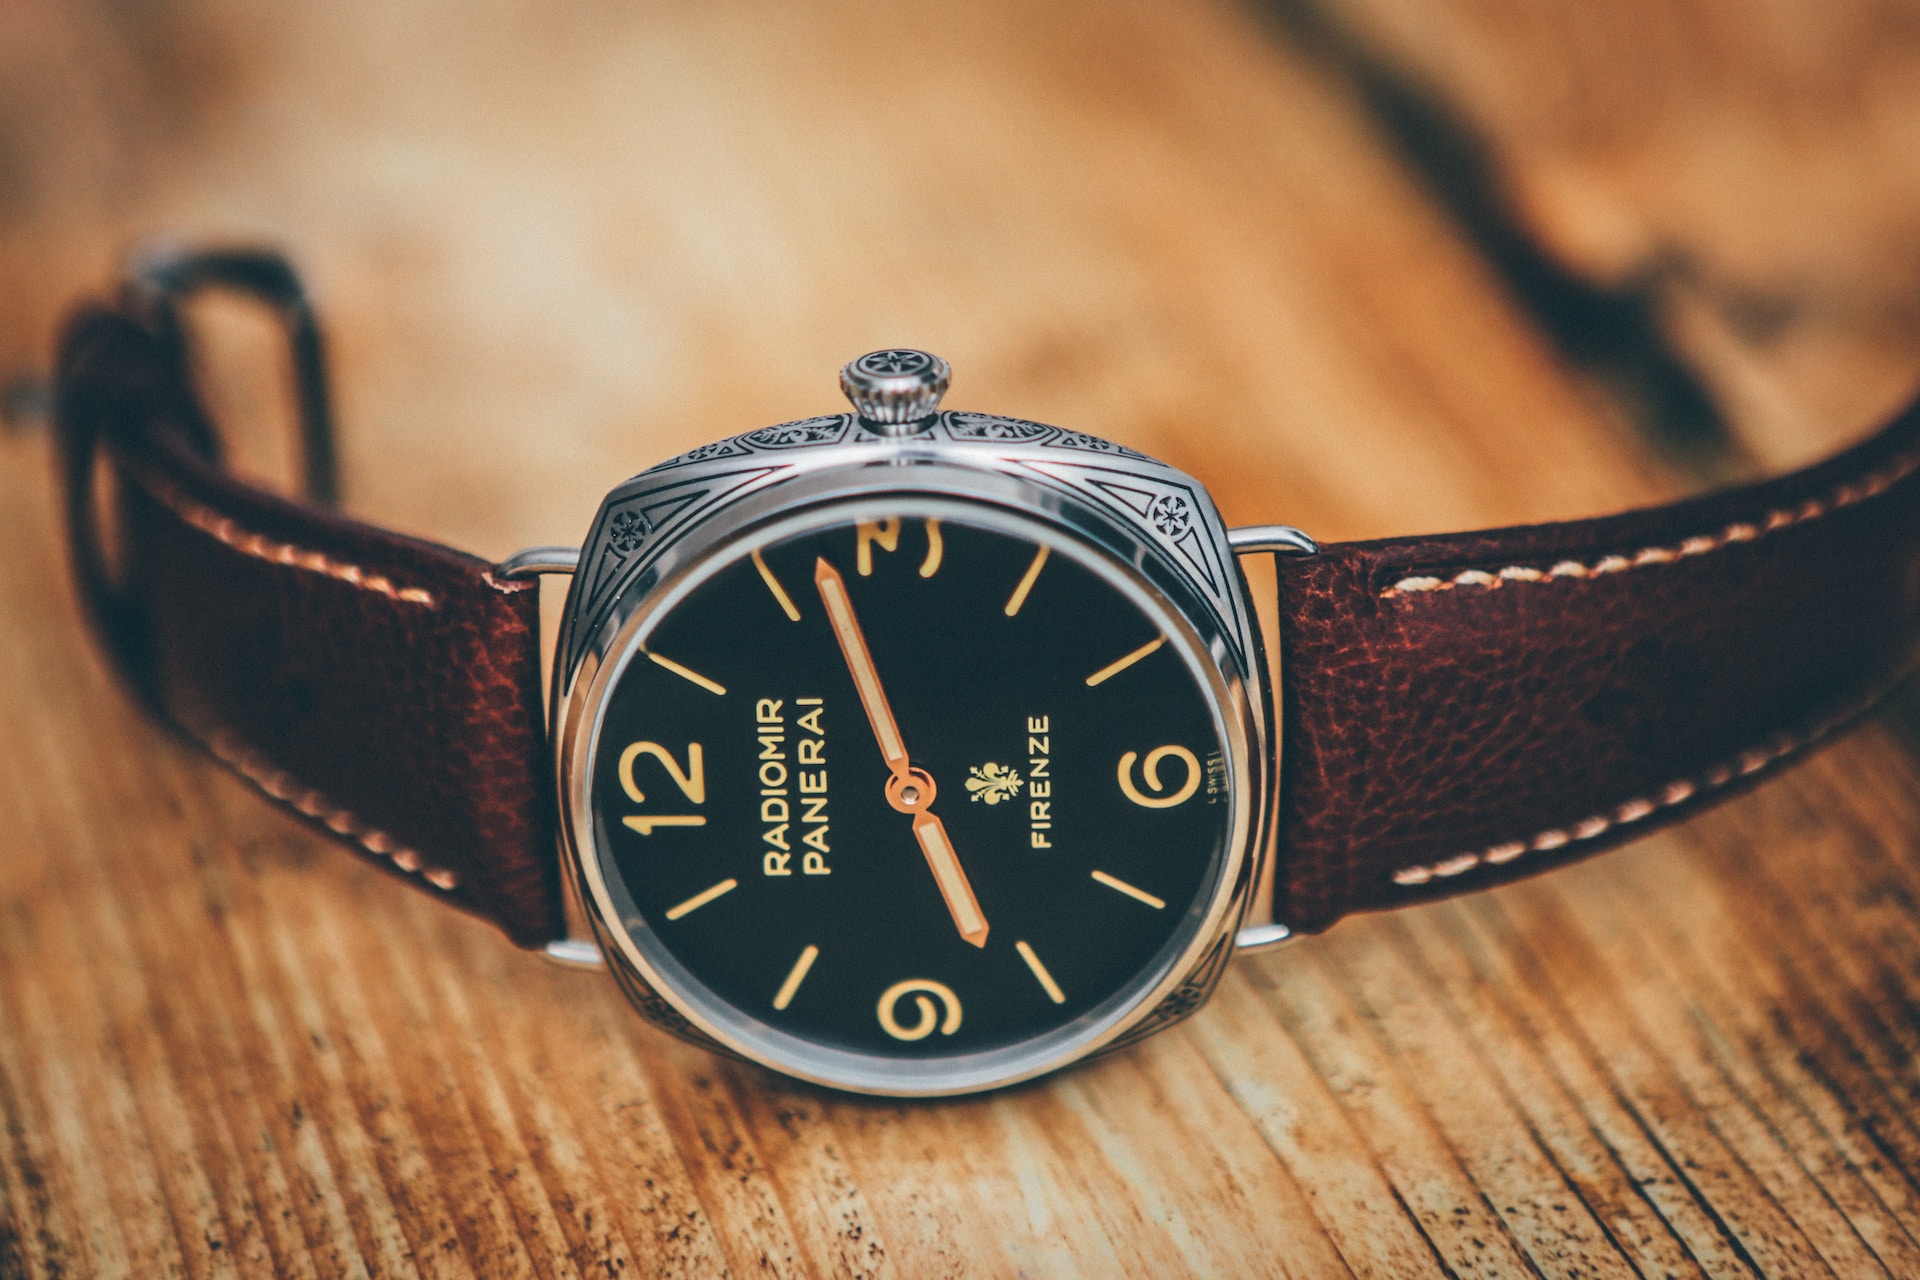 Radiomir Panerai watch on a wooden table